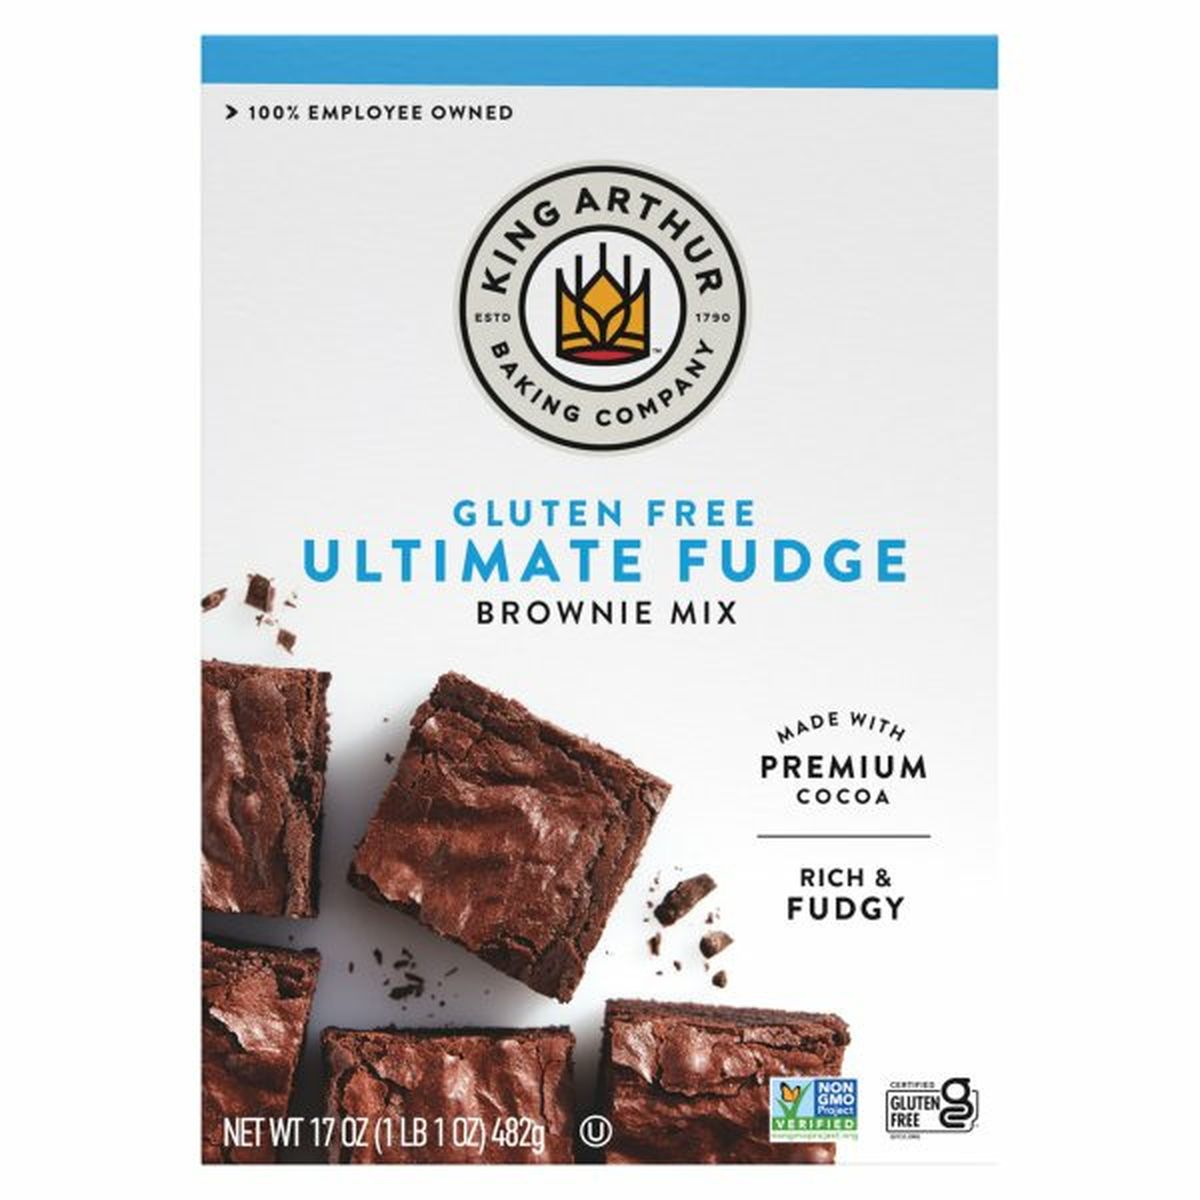 Calories in King Arthur Baking Company Brownie Mix, Gluten Free, Ultimate Fudge